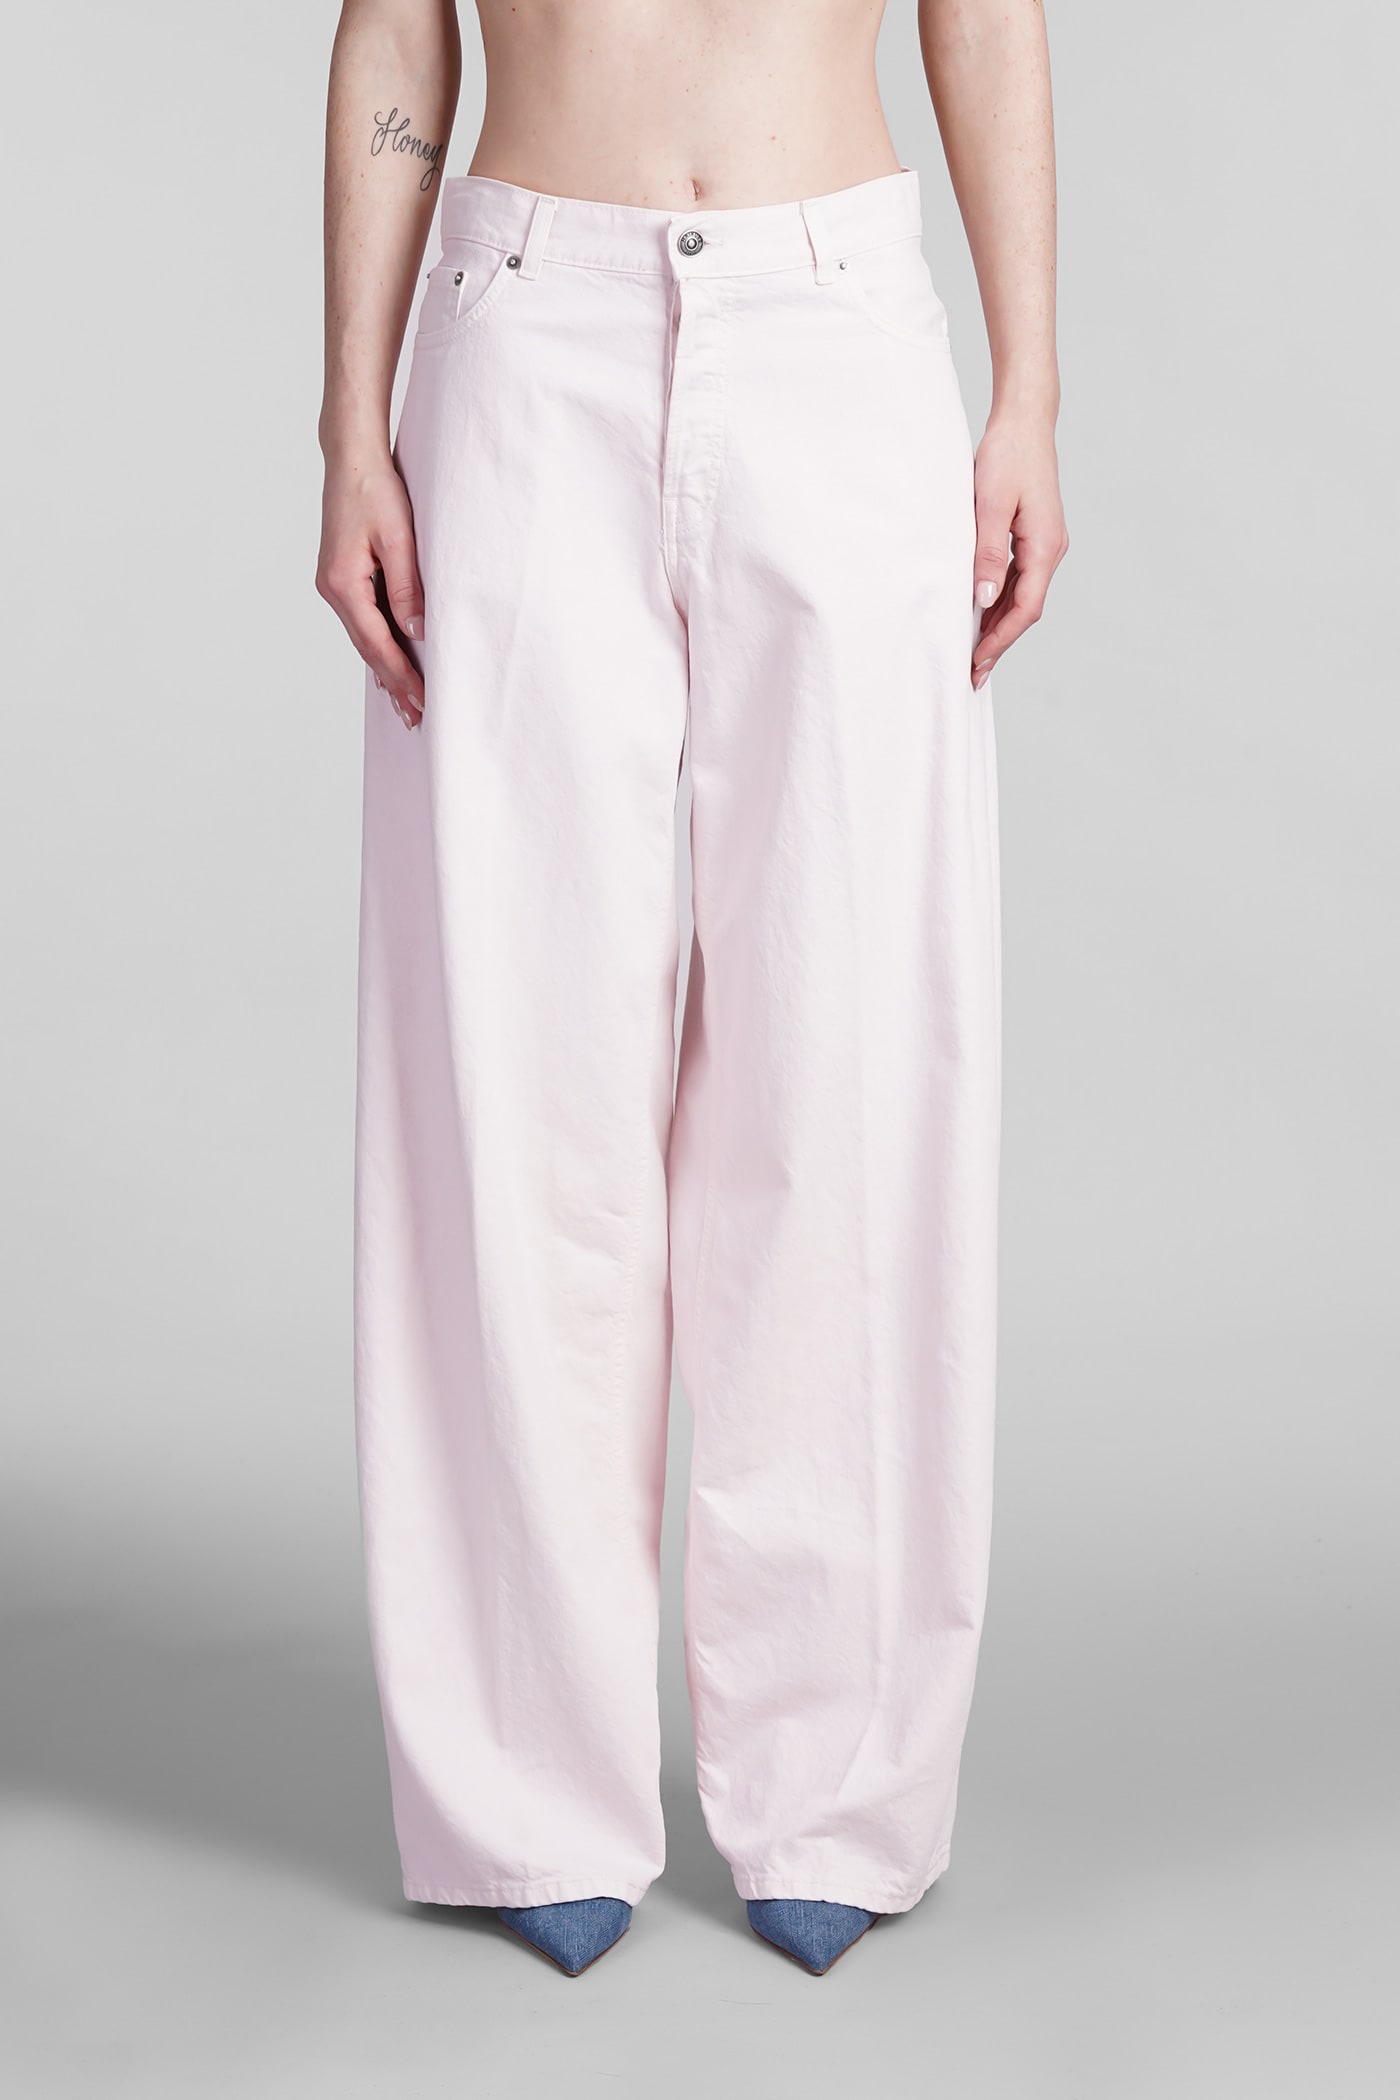 Bethany Jeans In Rose-pink Cotton